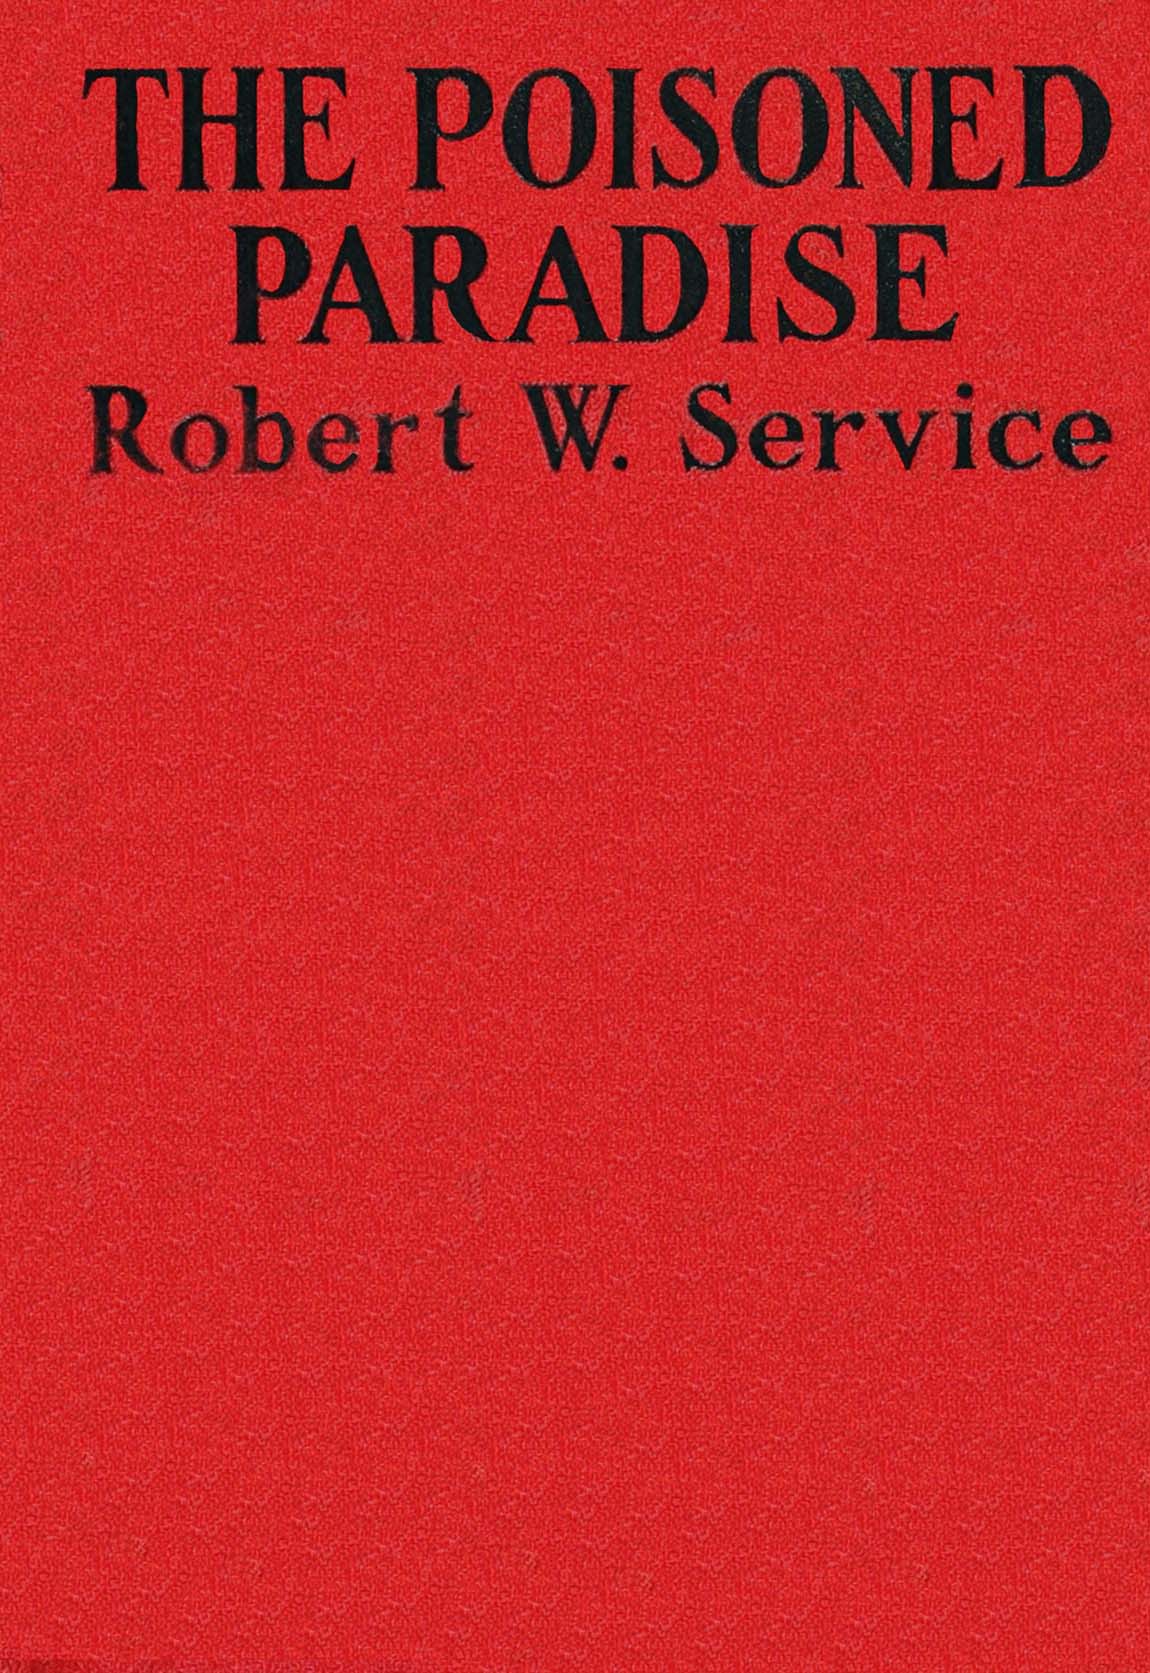 The poisoned paradise, by Robert W